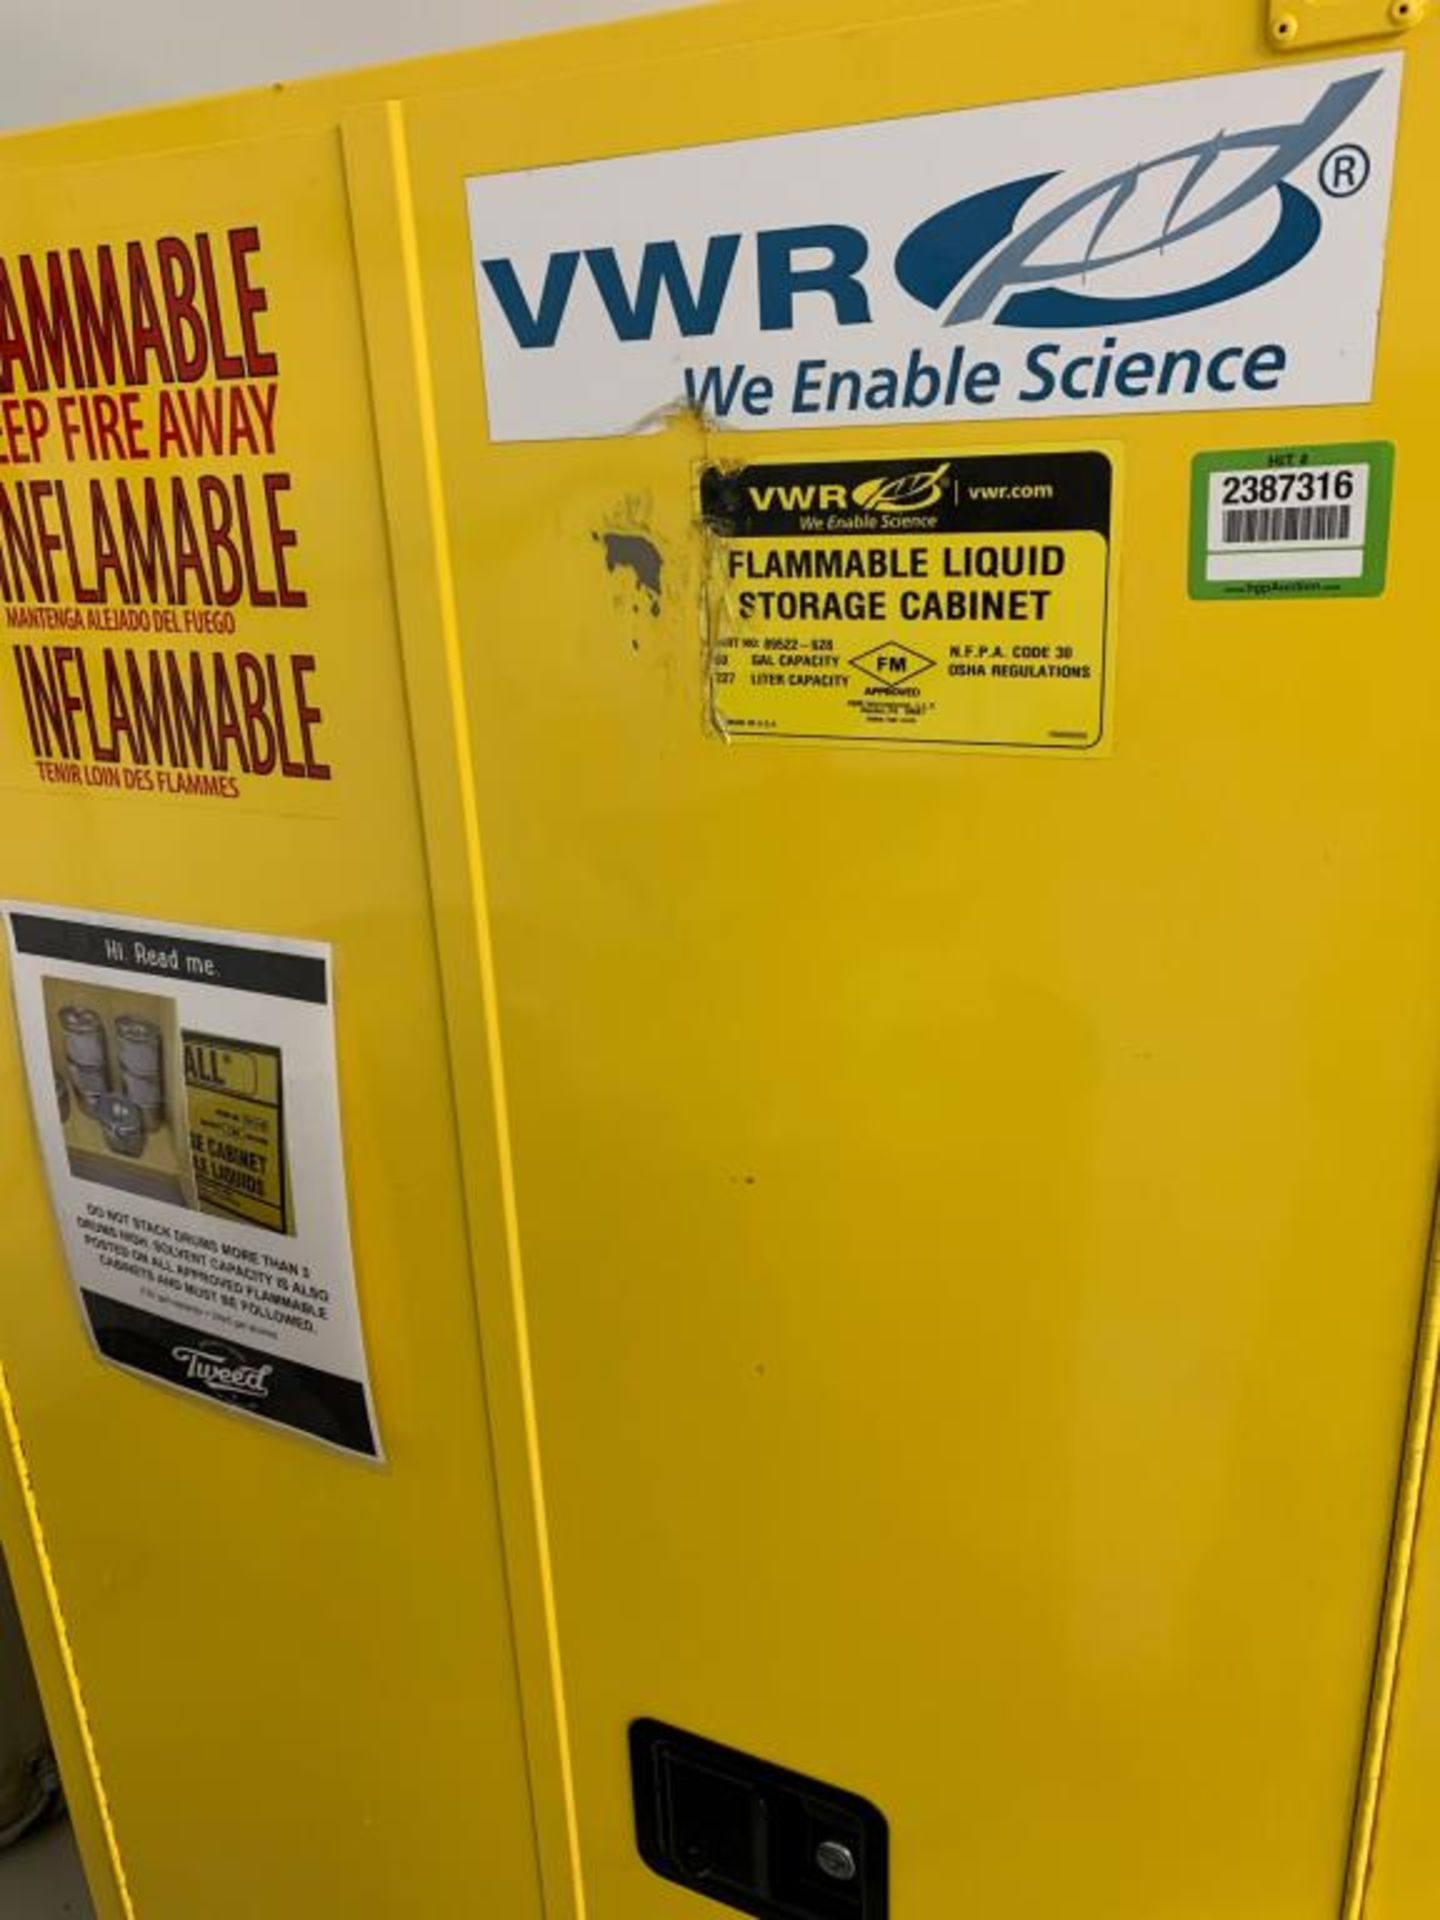 VWR Flammable Storage Cabinet - Image 4 of 4